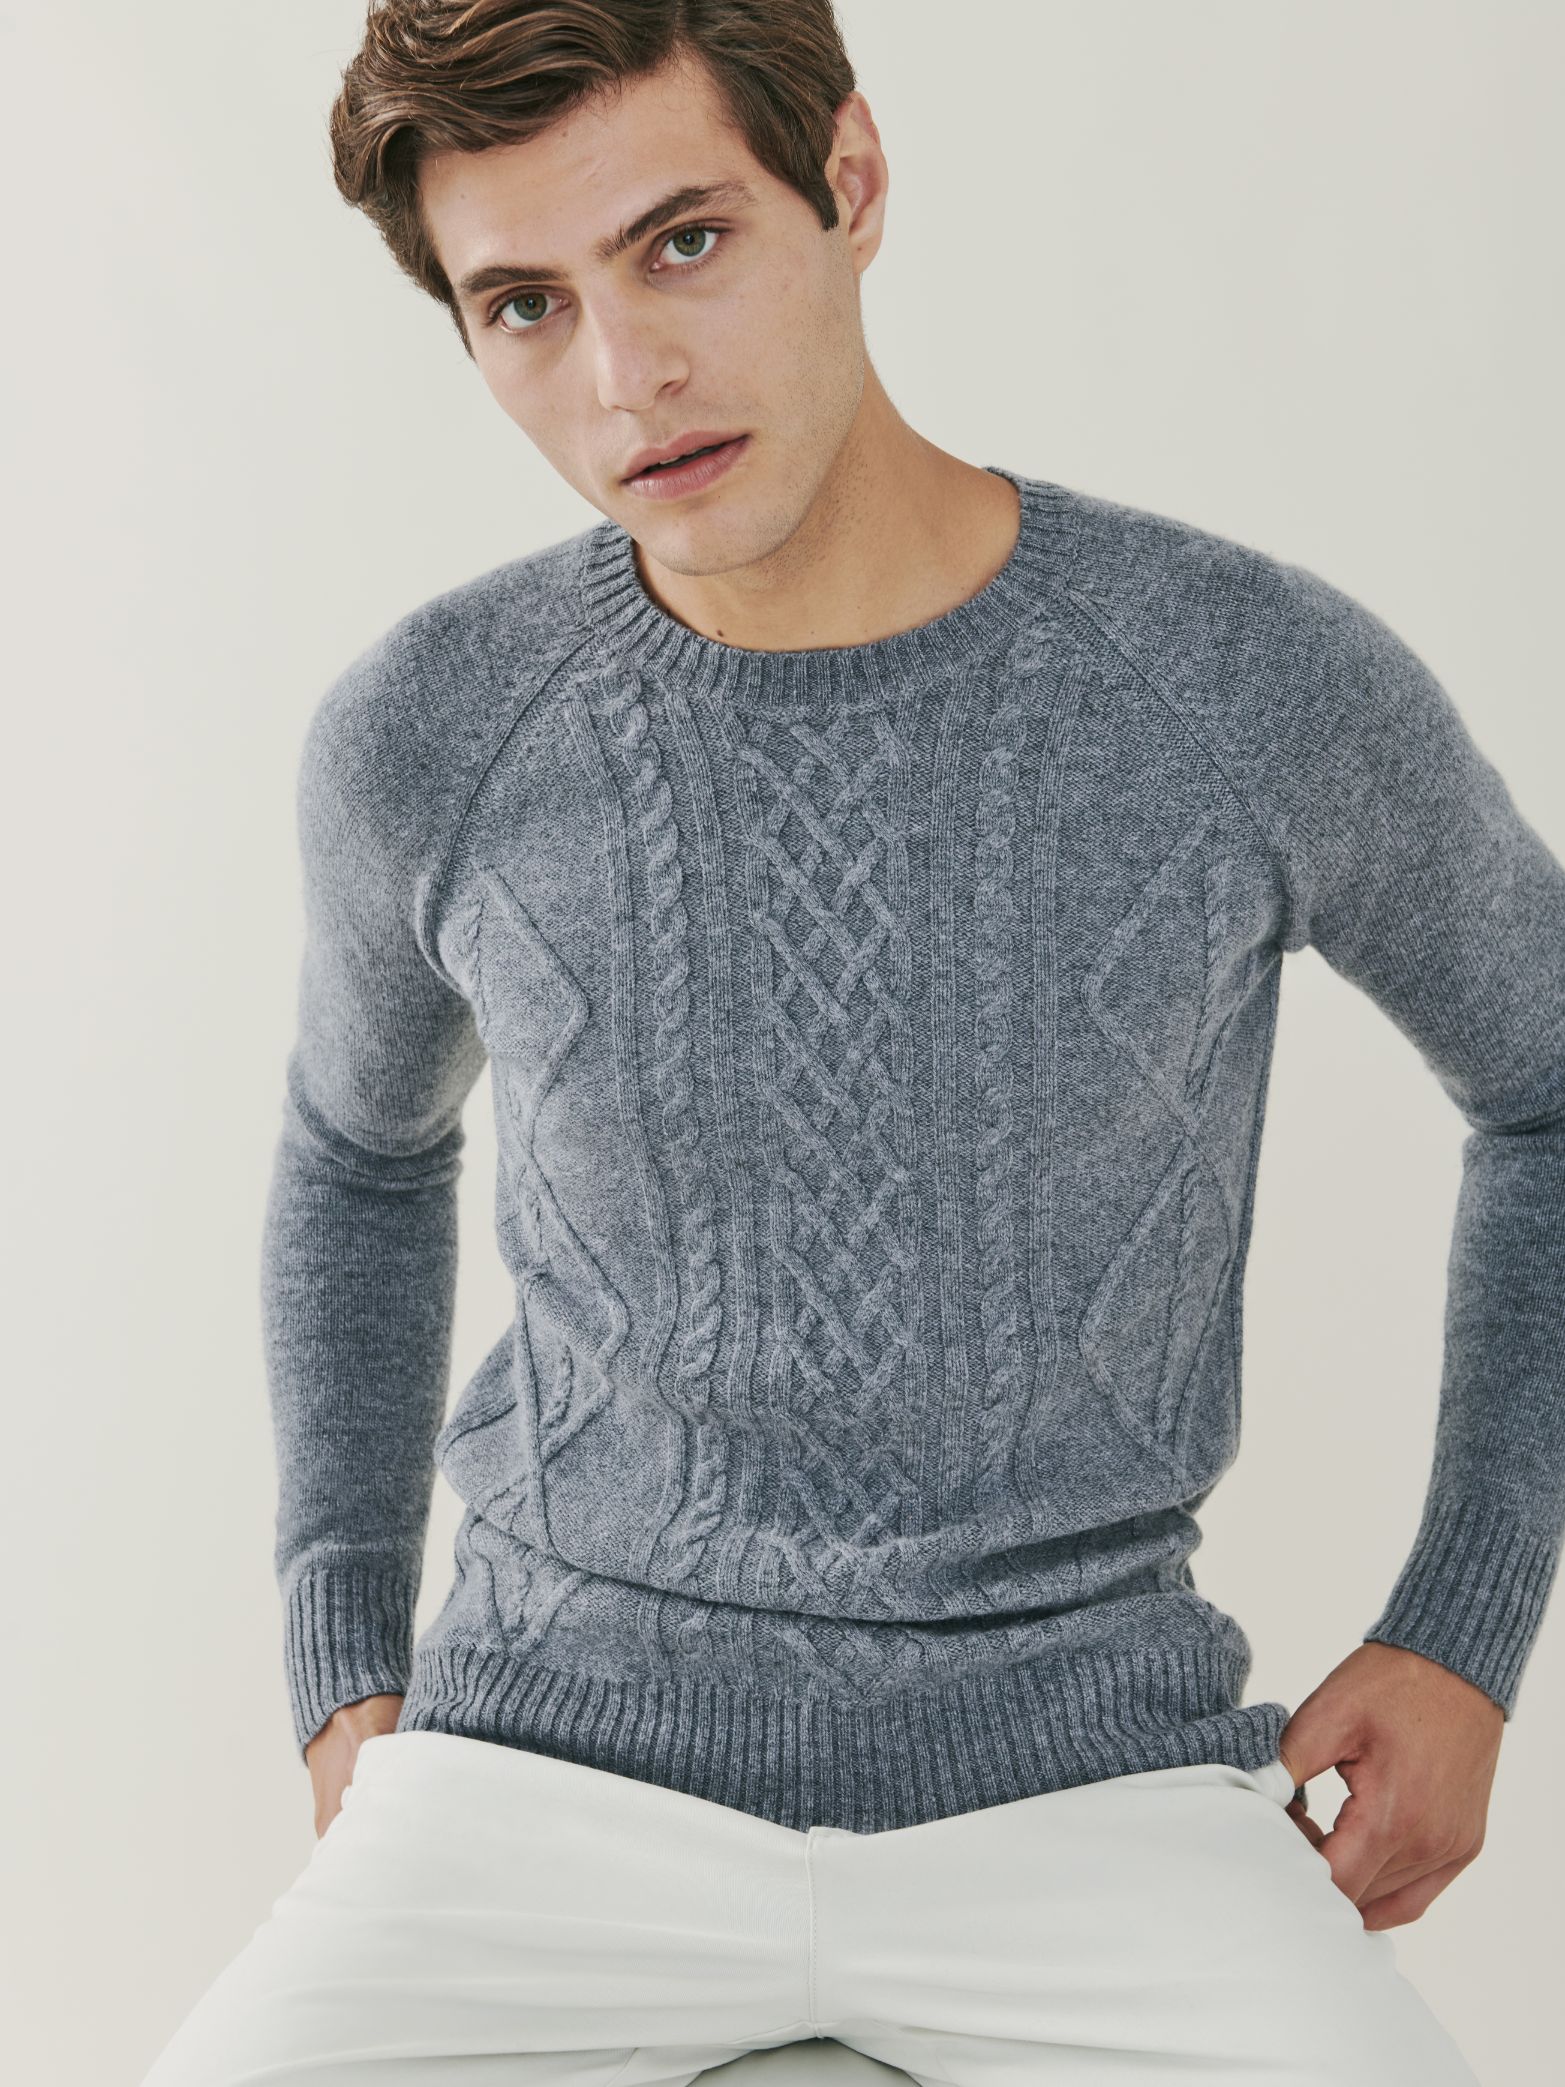 Mens luxury cable knit cashmere crew neck sweater grey